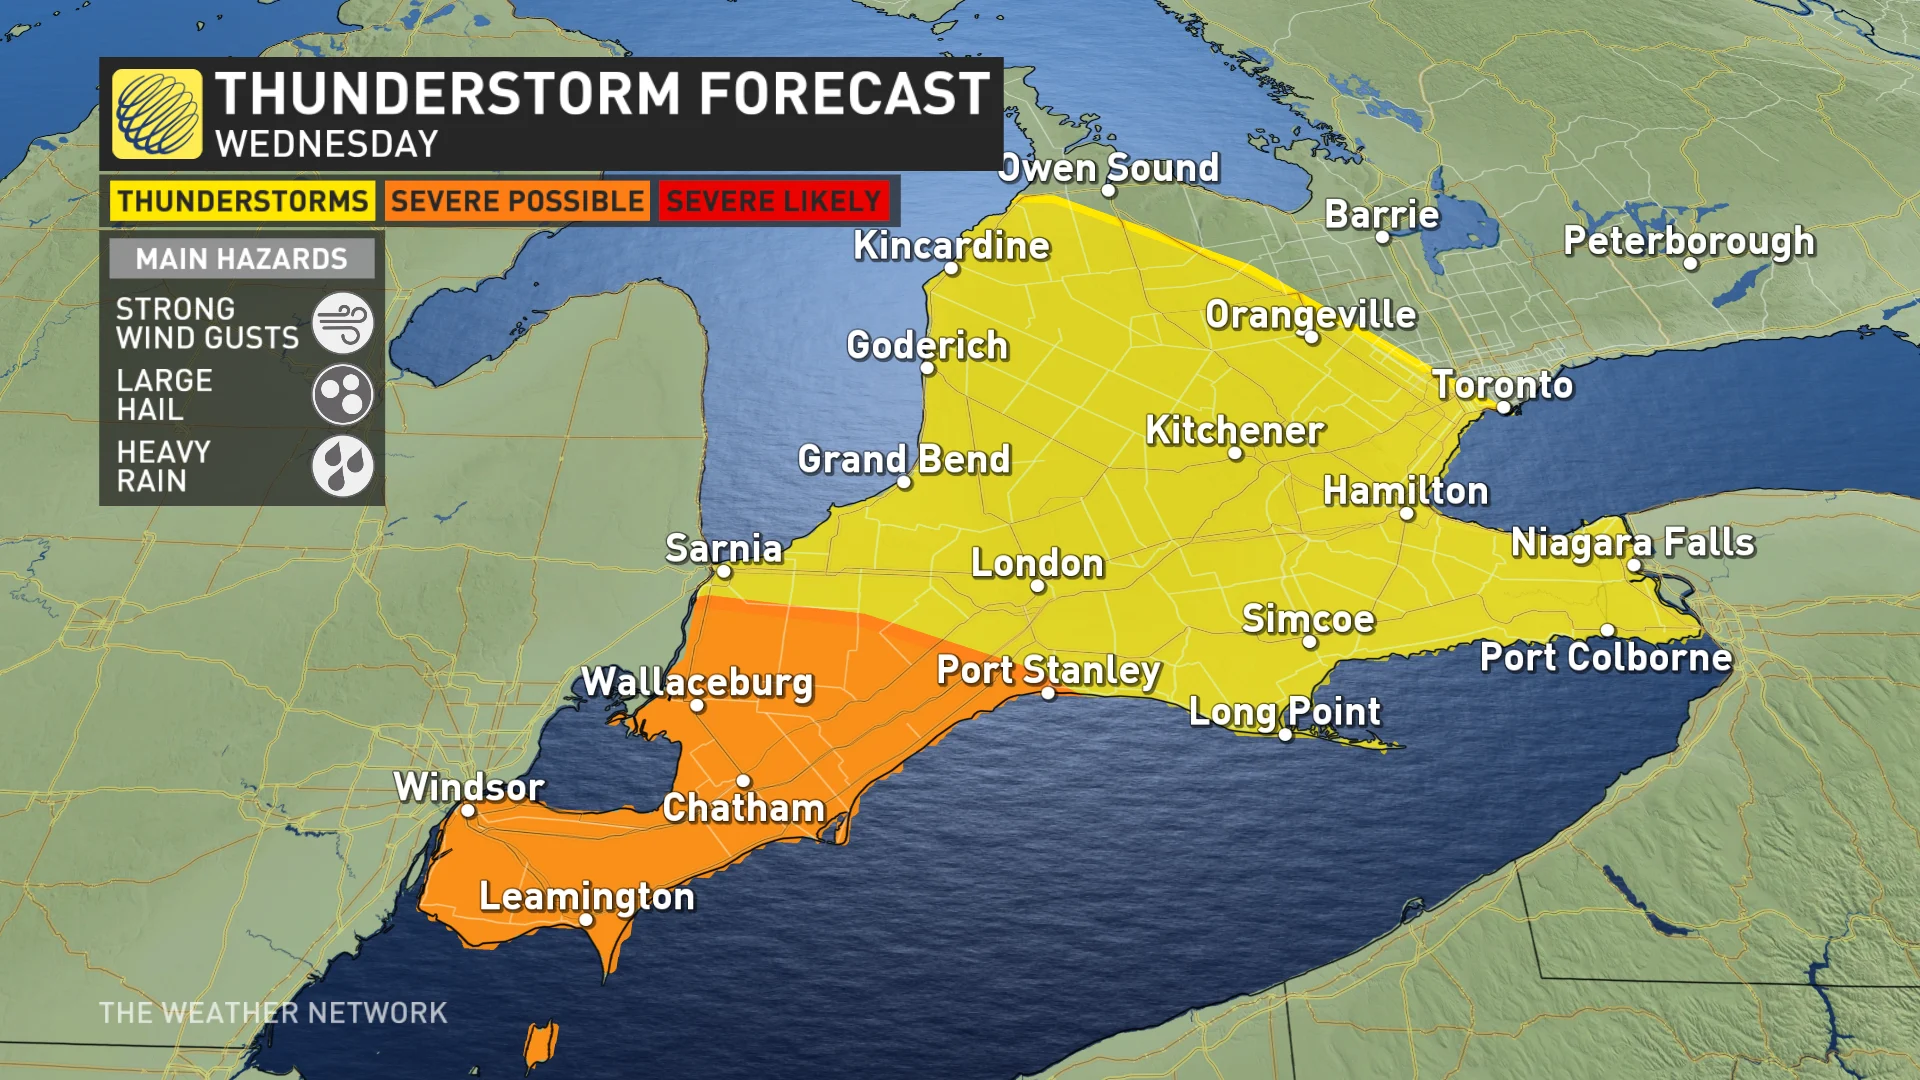 Ontario storm risk map Wednesday (updated April 16)